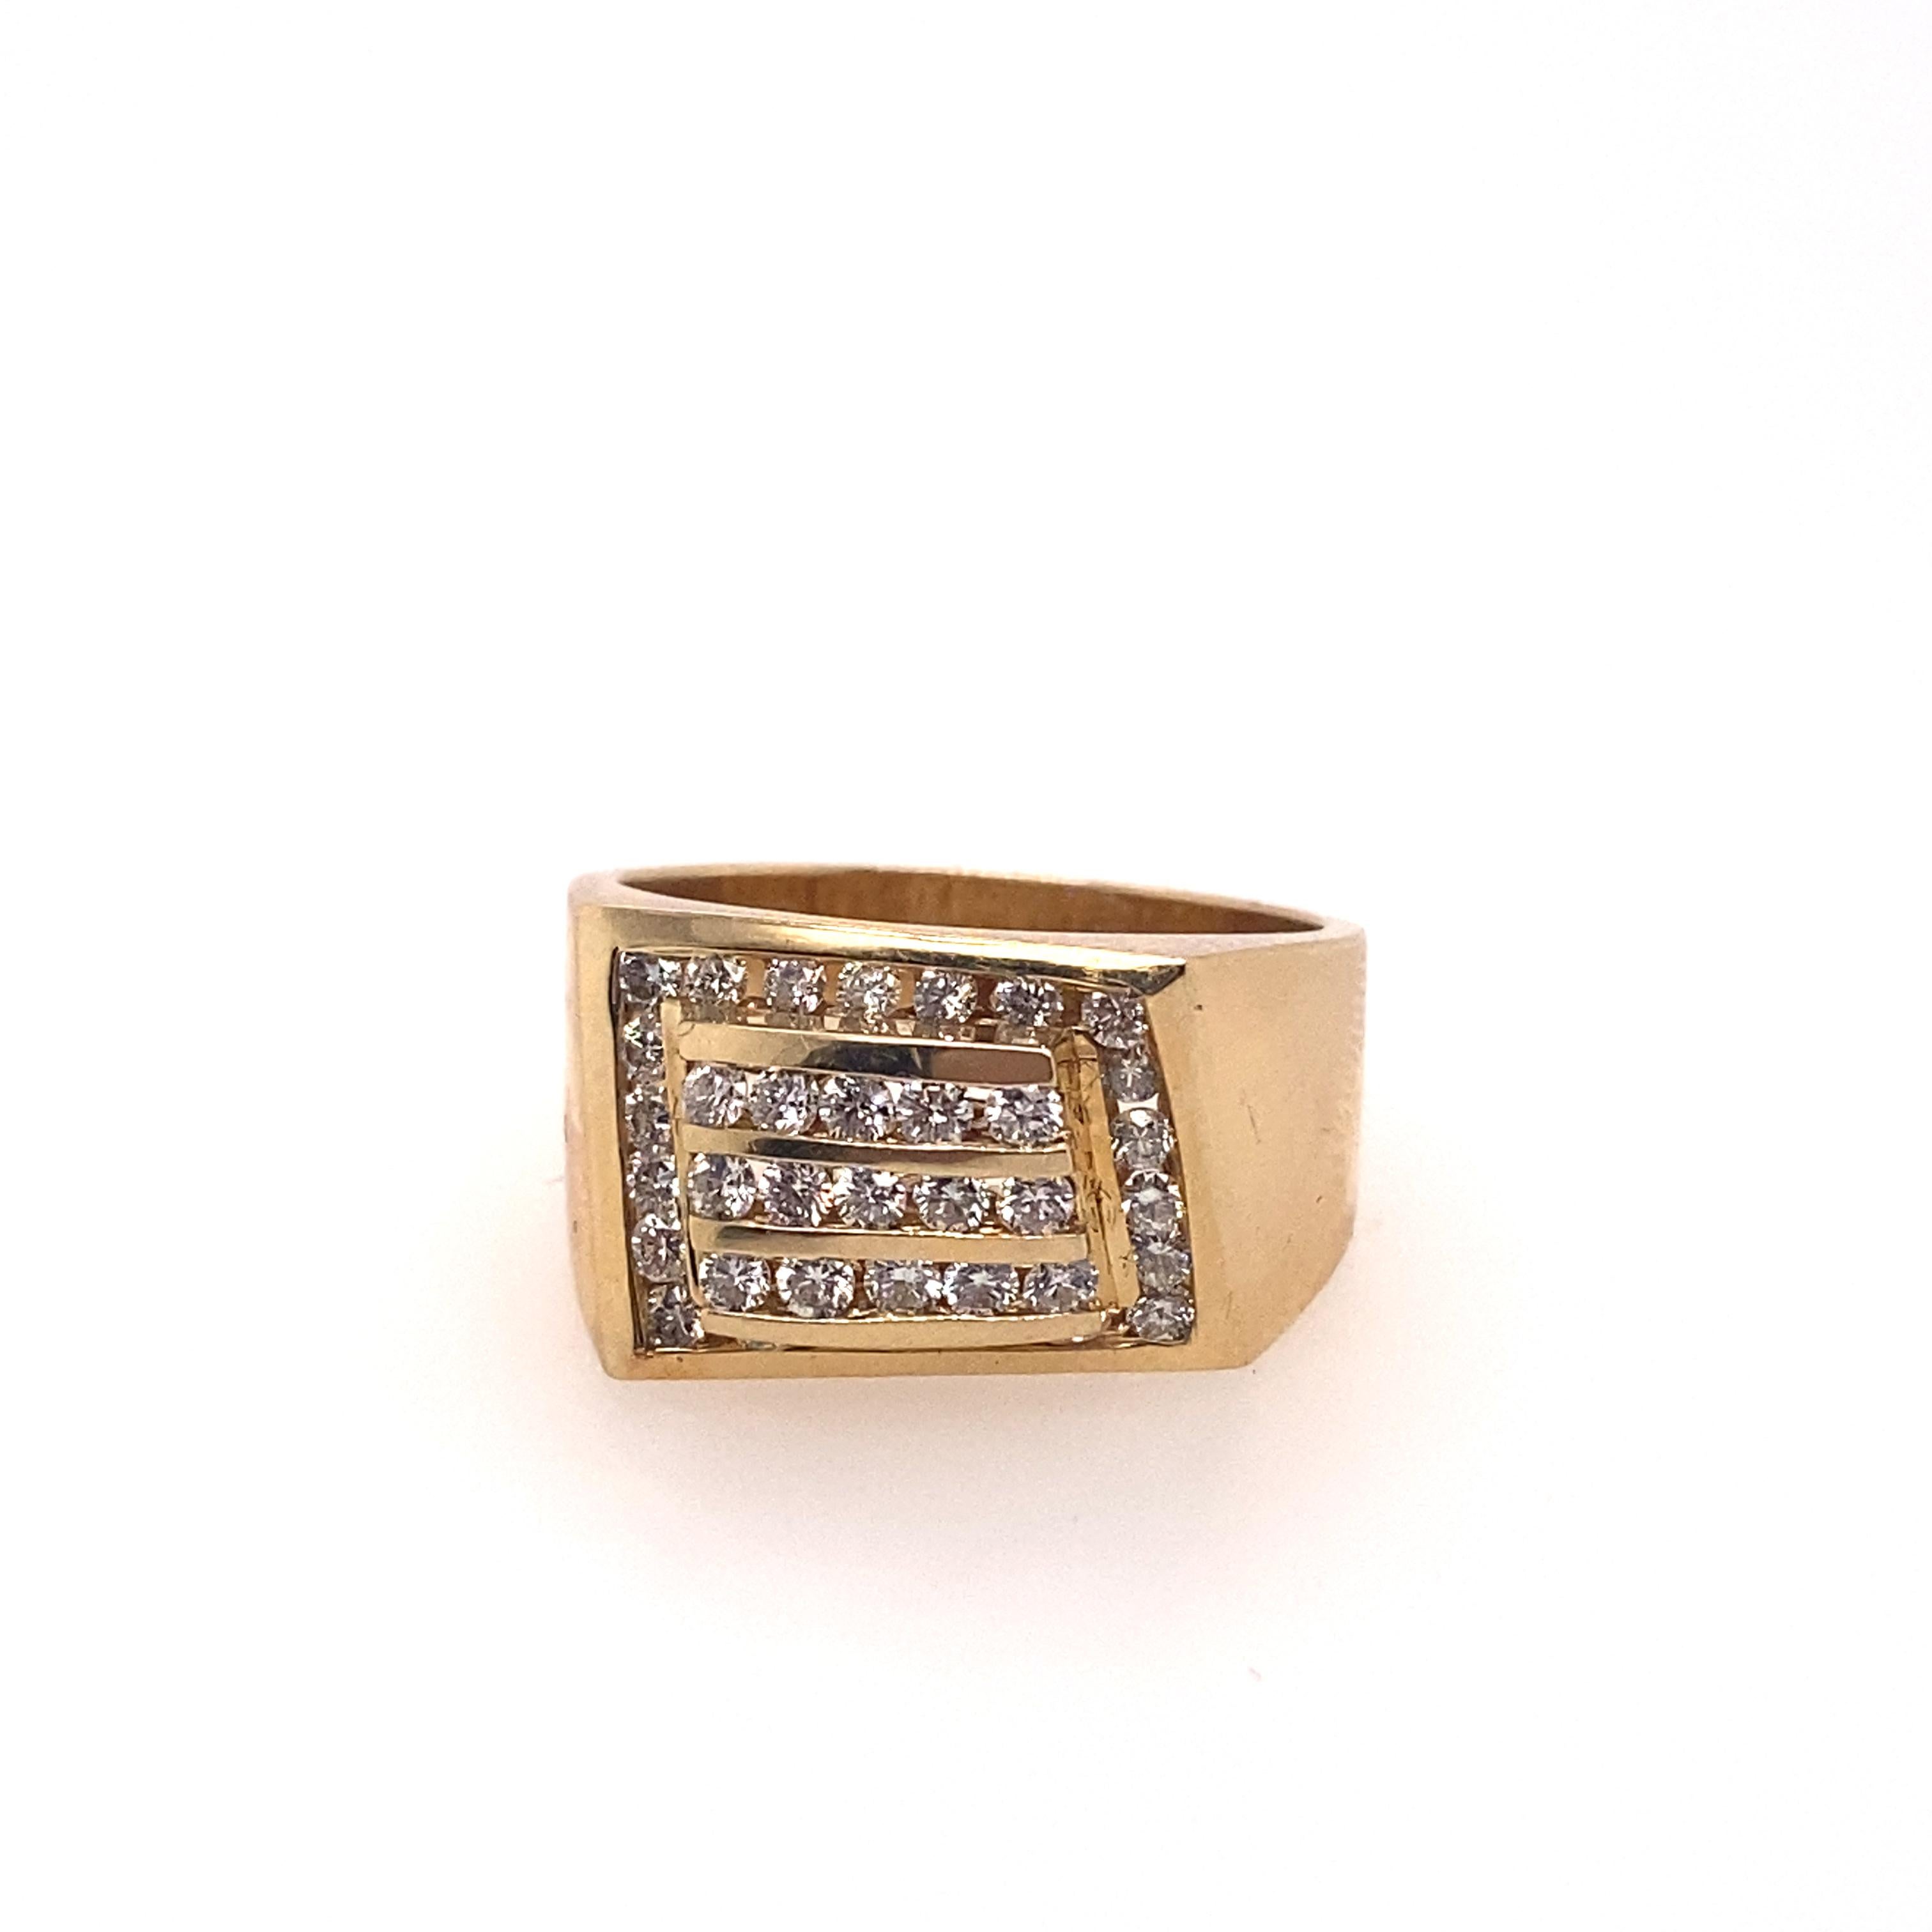 This stunning unisex signet ring is crafted in 14 karat yellow gold. The center is set with 37 brilliant round diamonds in that simple square signet ring. 

Diamonds Weight: 1.01 carat
Diamonds Shape : Brilliant Round
Diamonds Color & Clarity: